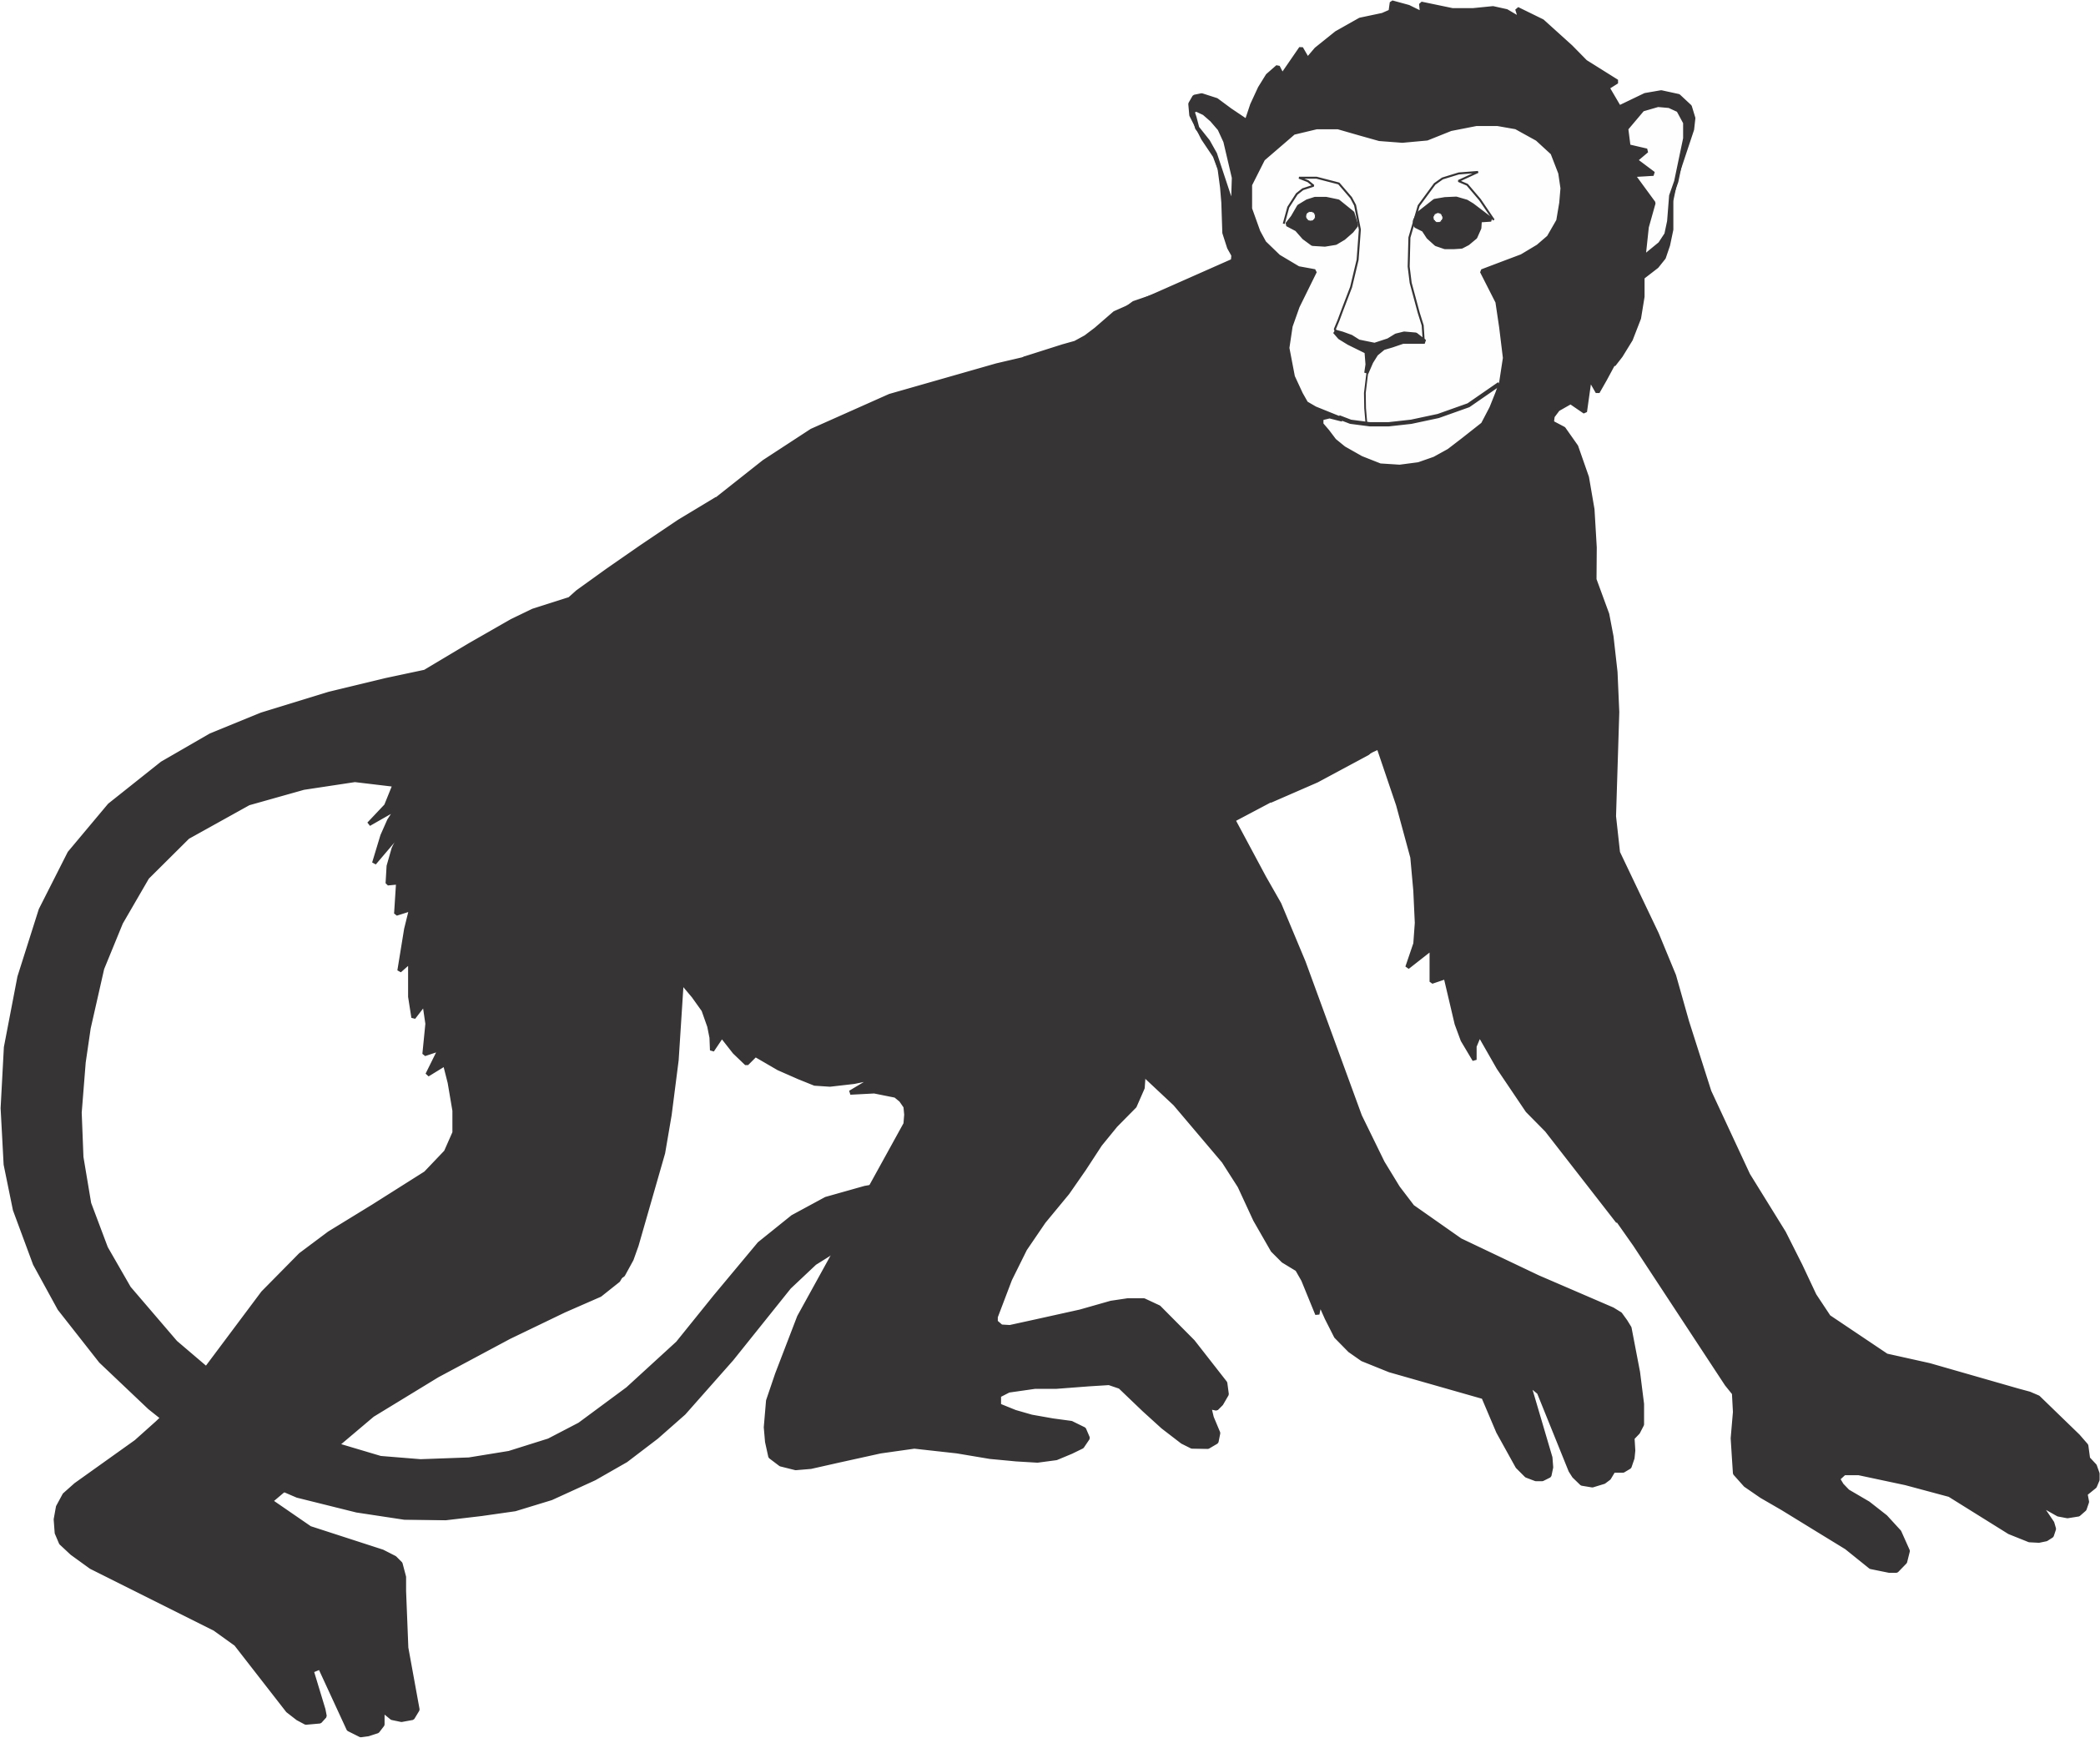 Cartoon Monkey | Page 2 - Clipart library - Clipart library